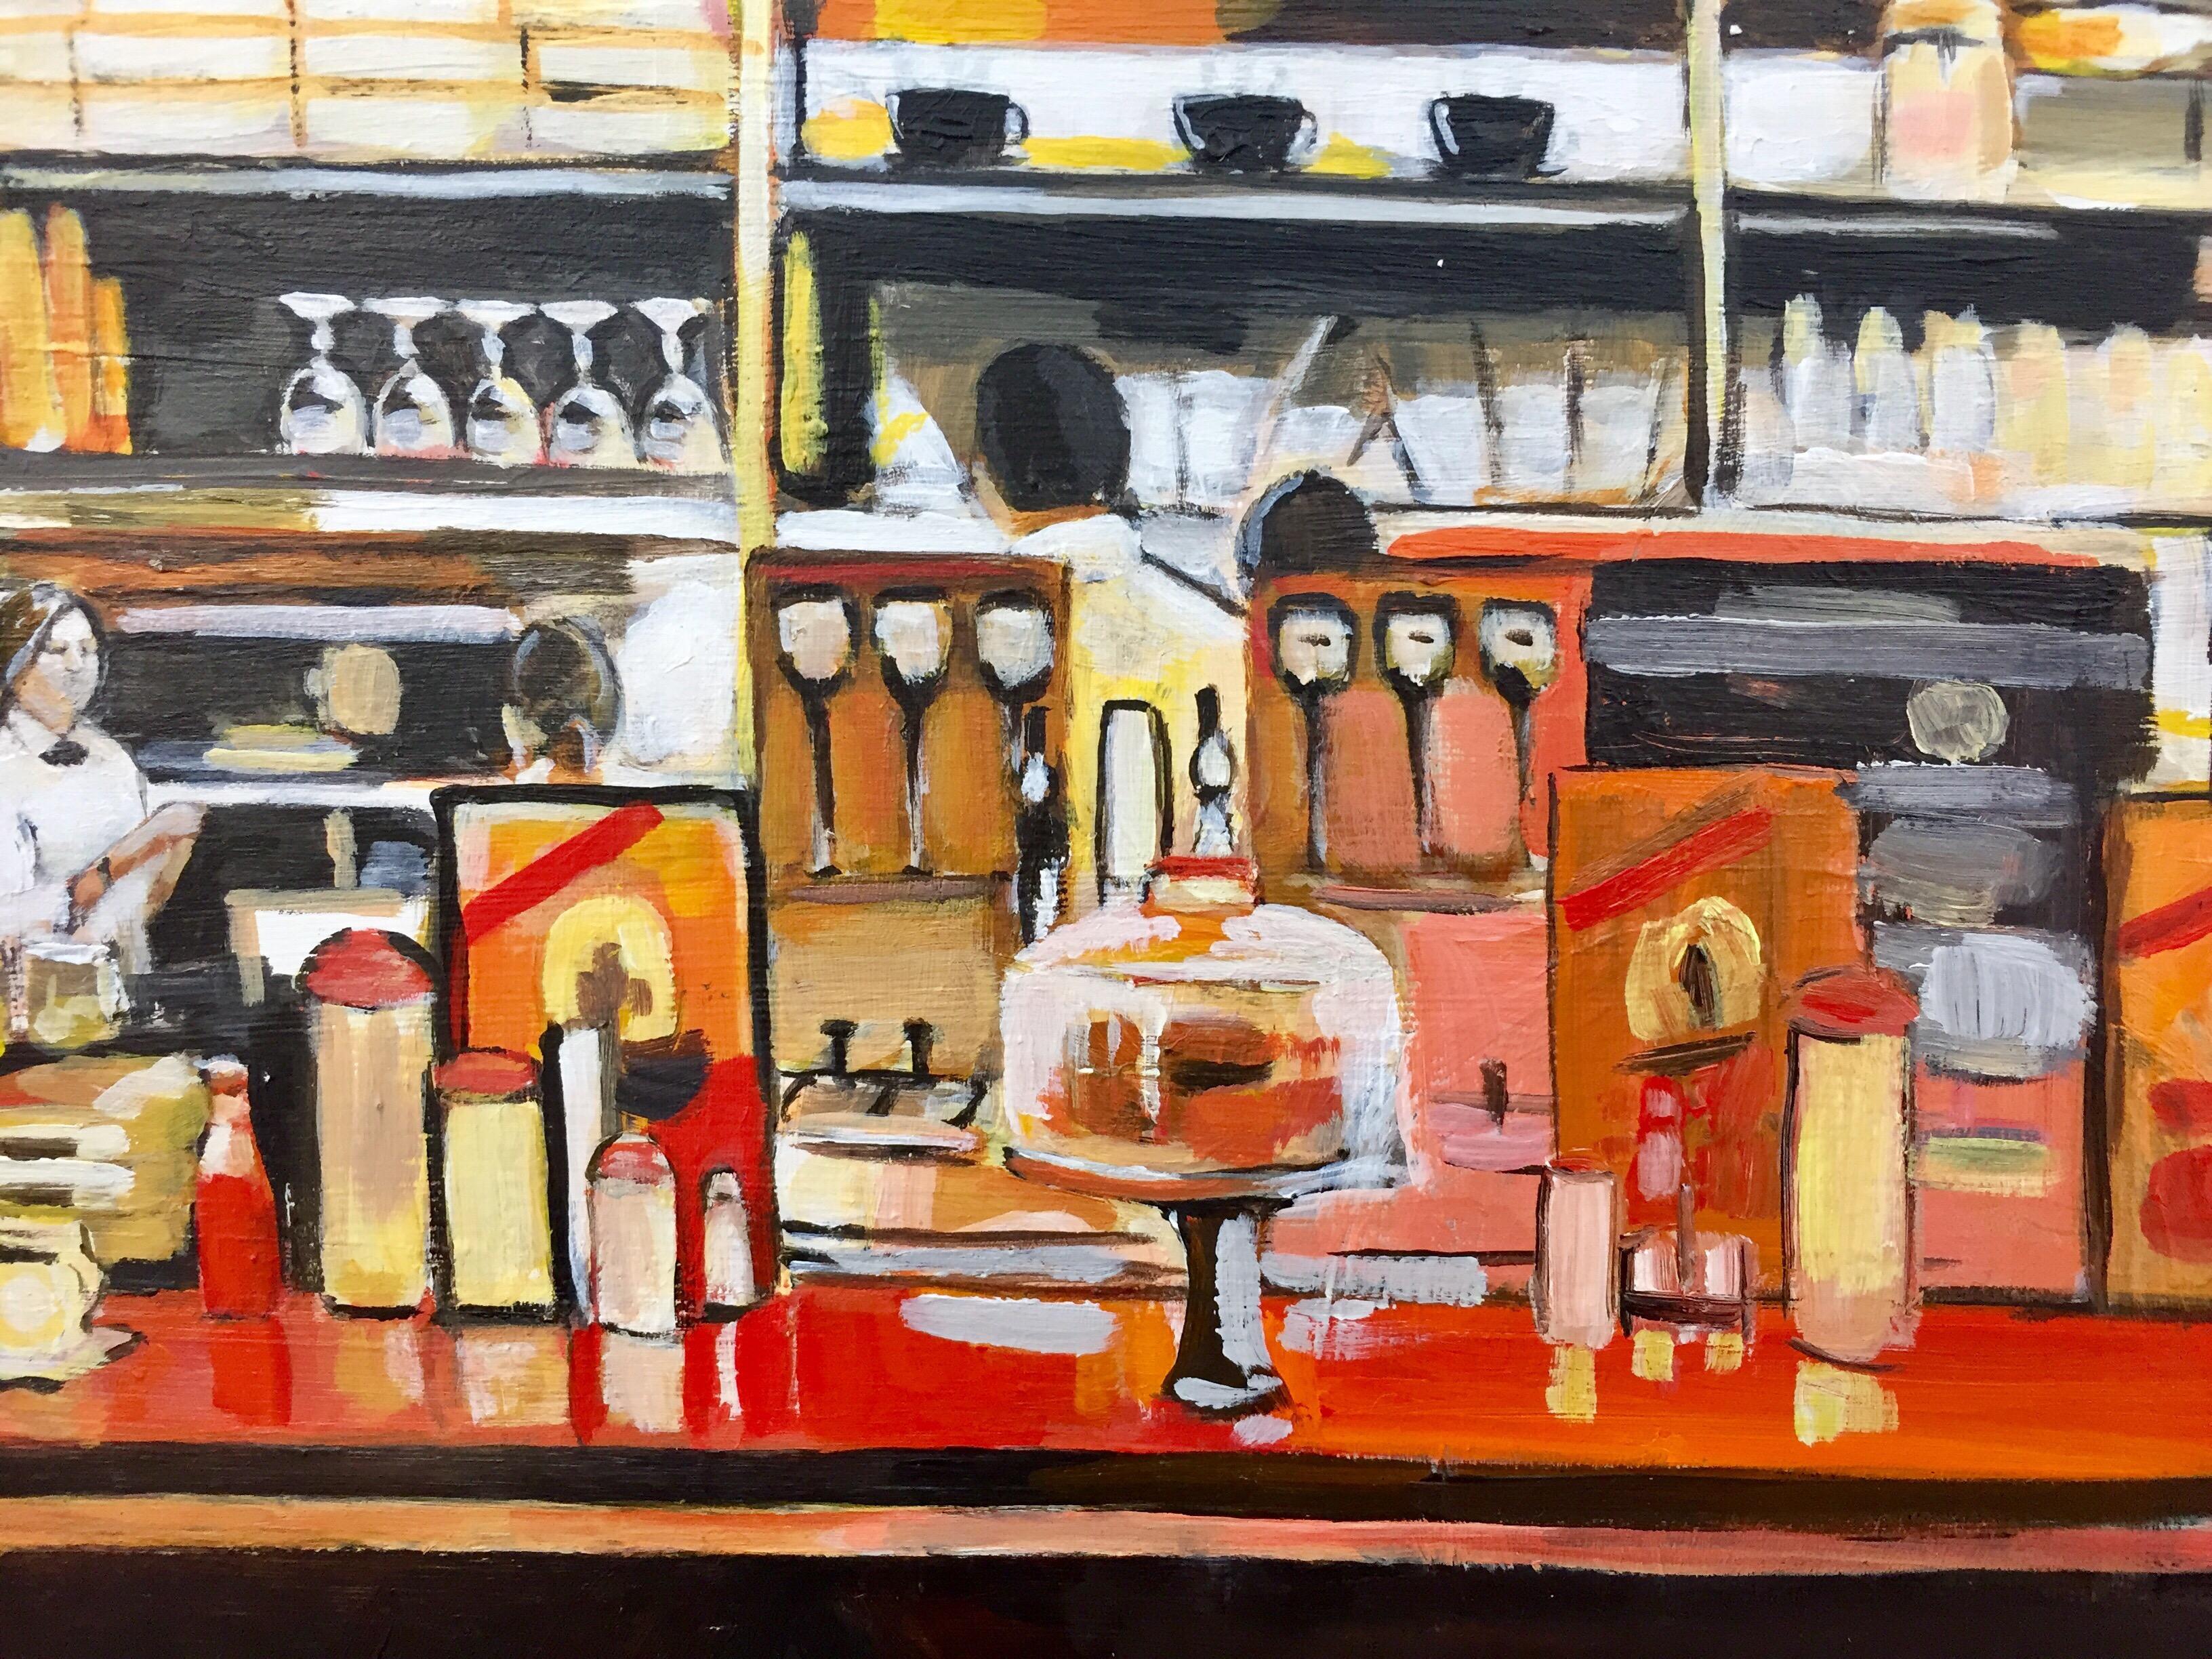 American Diner Painting by Leading British Urban Landscape Artist, Angela Wakefield. Paintings of American Diners, Food Courts, Truck Stops, Gas Stations, Still Life and all aspects of “Americana”.

The character of New York’s skyline and large